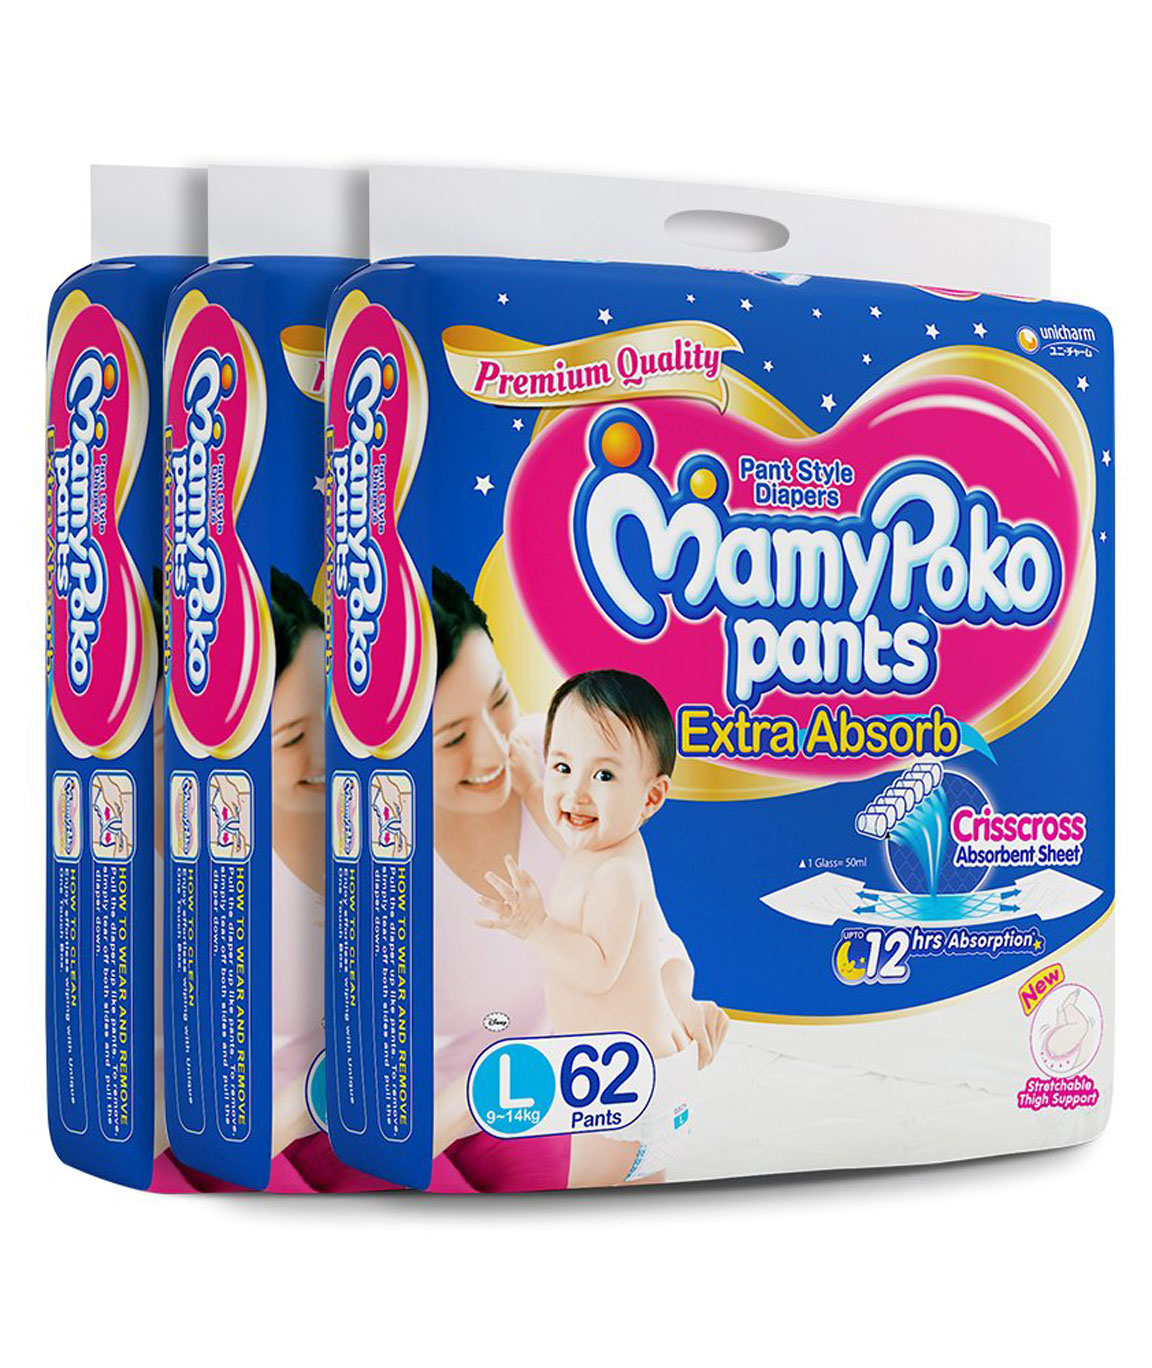 KASH INN - MamyPoko Extra Absorb Pant Style Diaper Monthly Jumbo Pack Large  Size - 96 Pieces MRP: 1499 Kash Inn Price: 1094 Whatsapp on +91-7889422867  and book your order Free Shipping